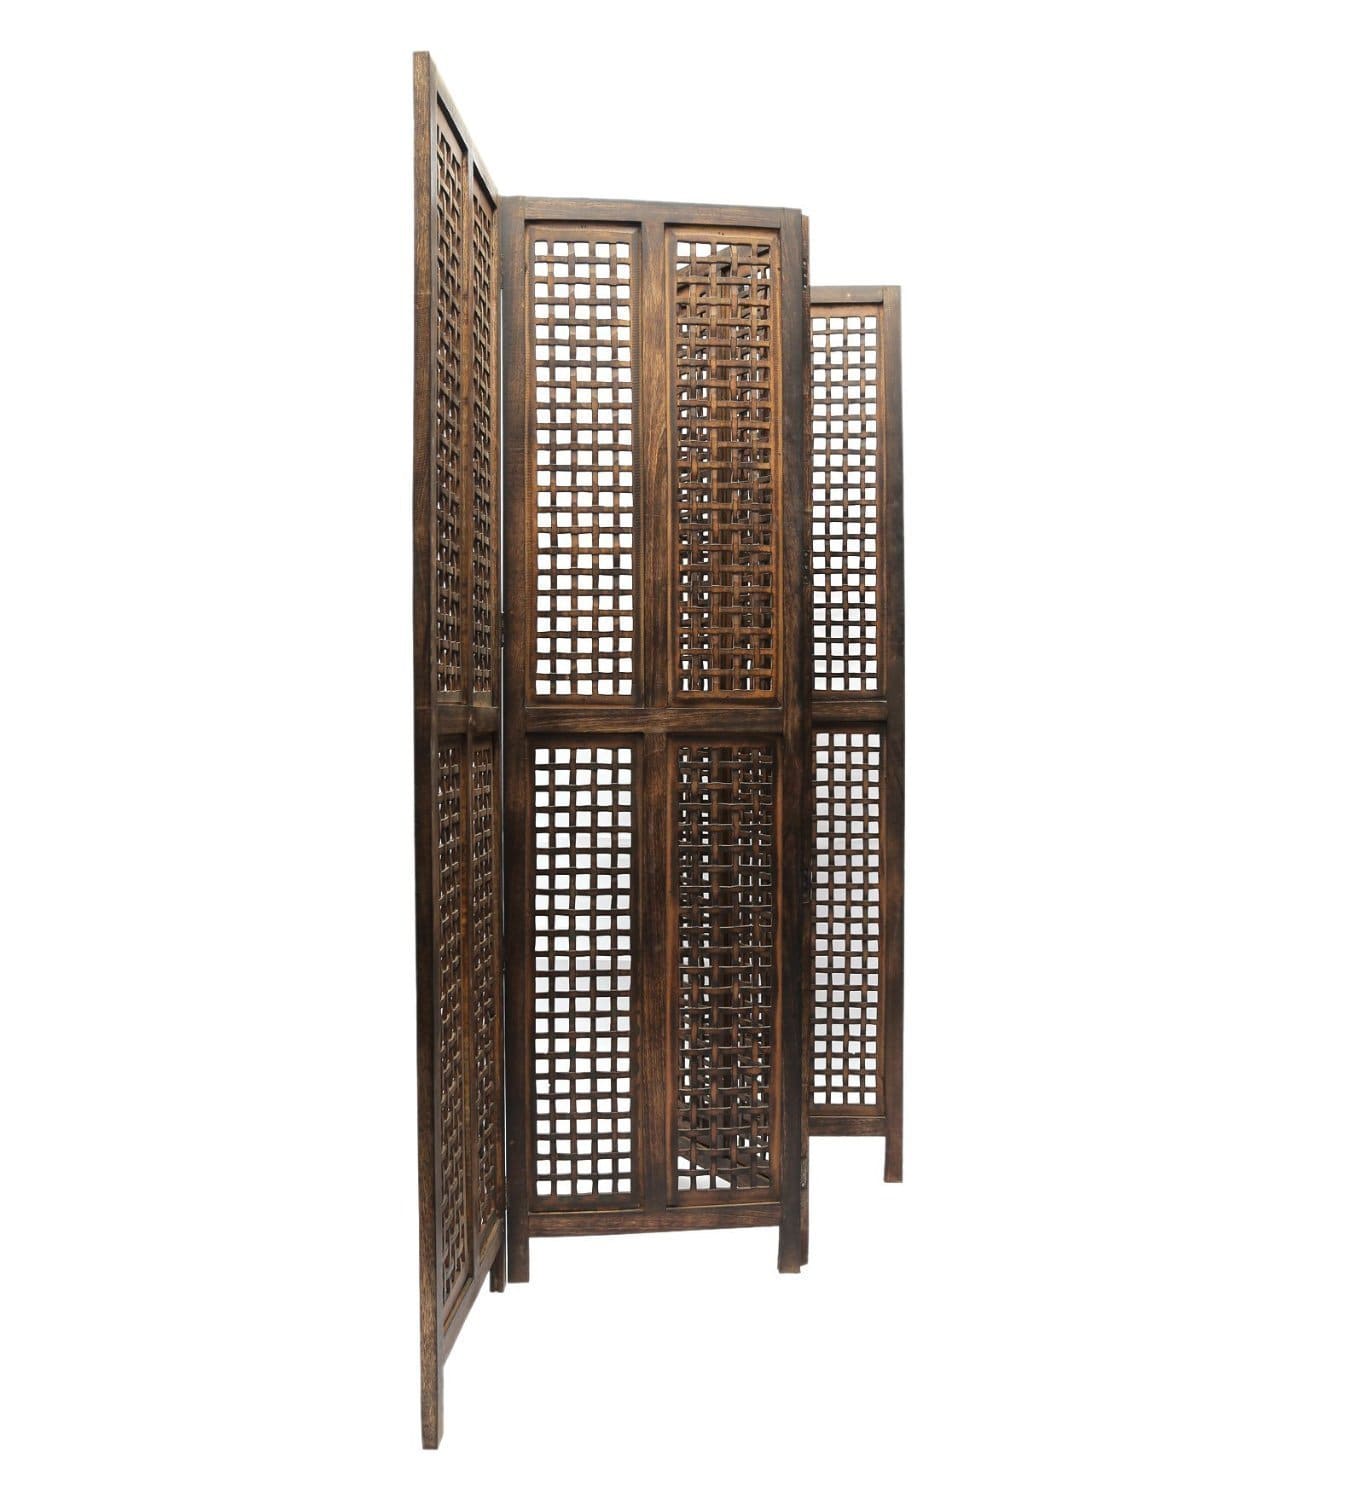 Wooden Partitions Wood Room Divider Partition for Living Room 4 Panels - Room Separators Screen Panel for Home & Kitchen to be Placed in Zig-Zag